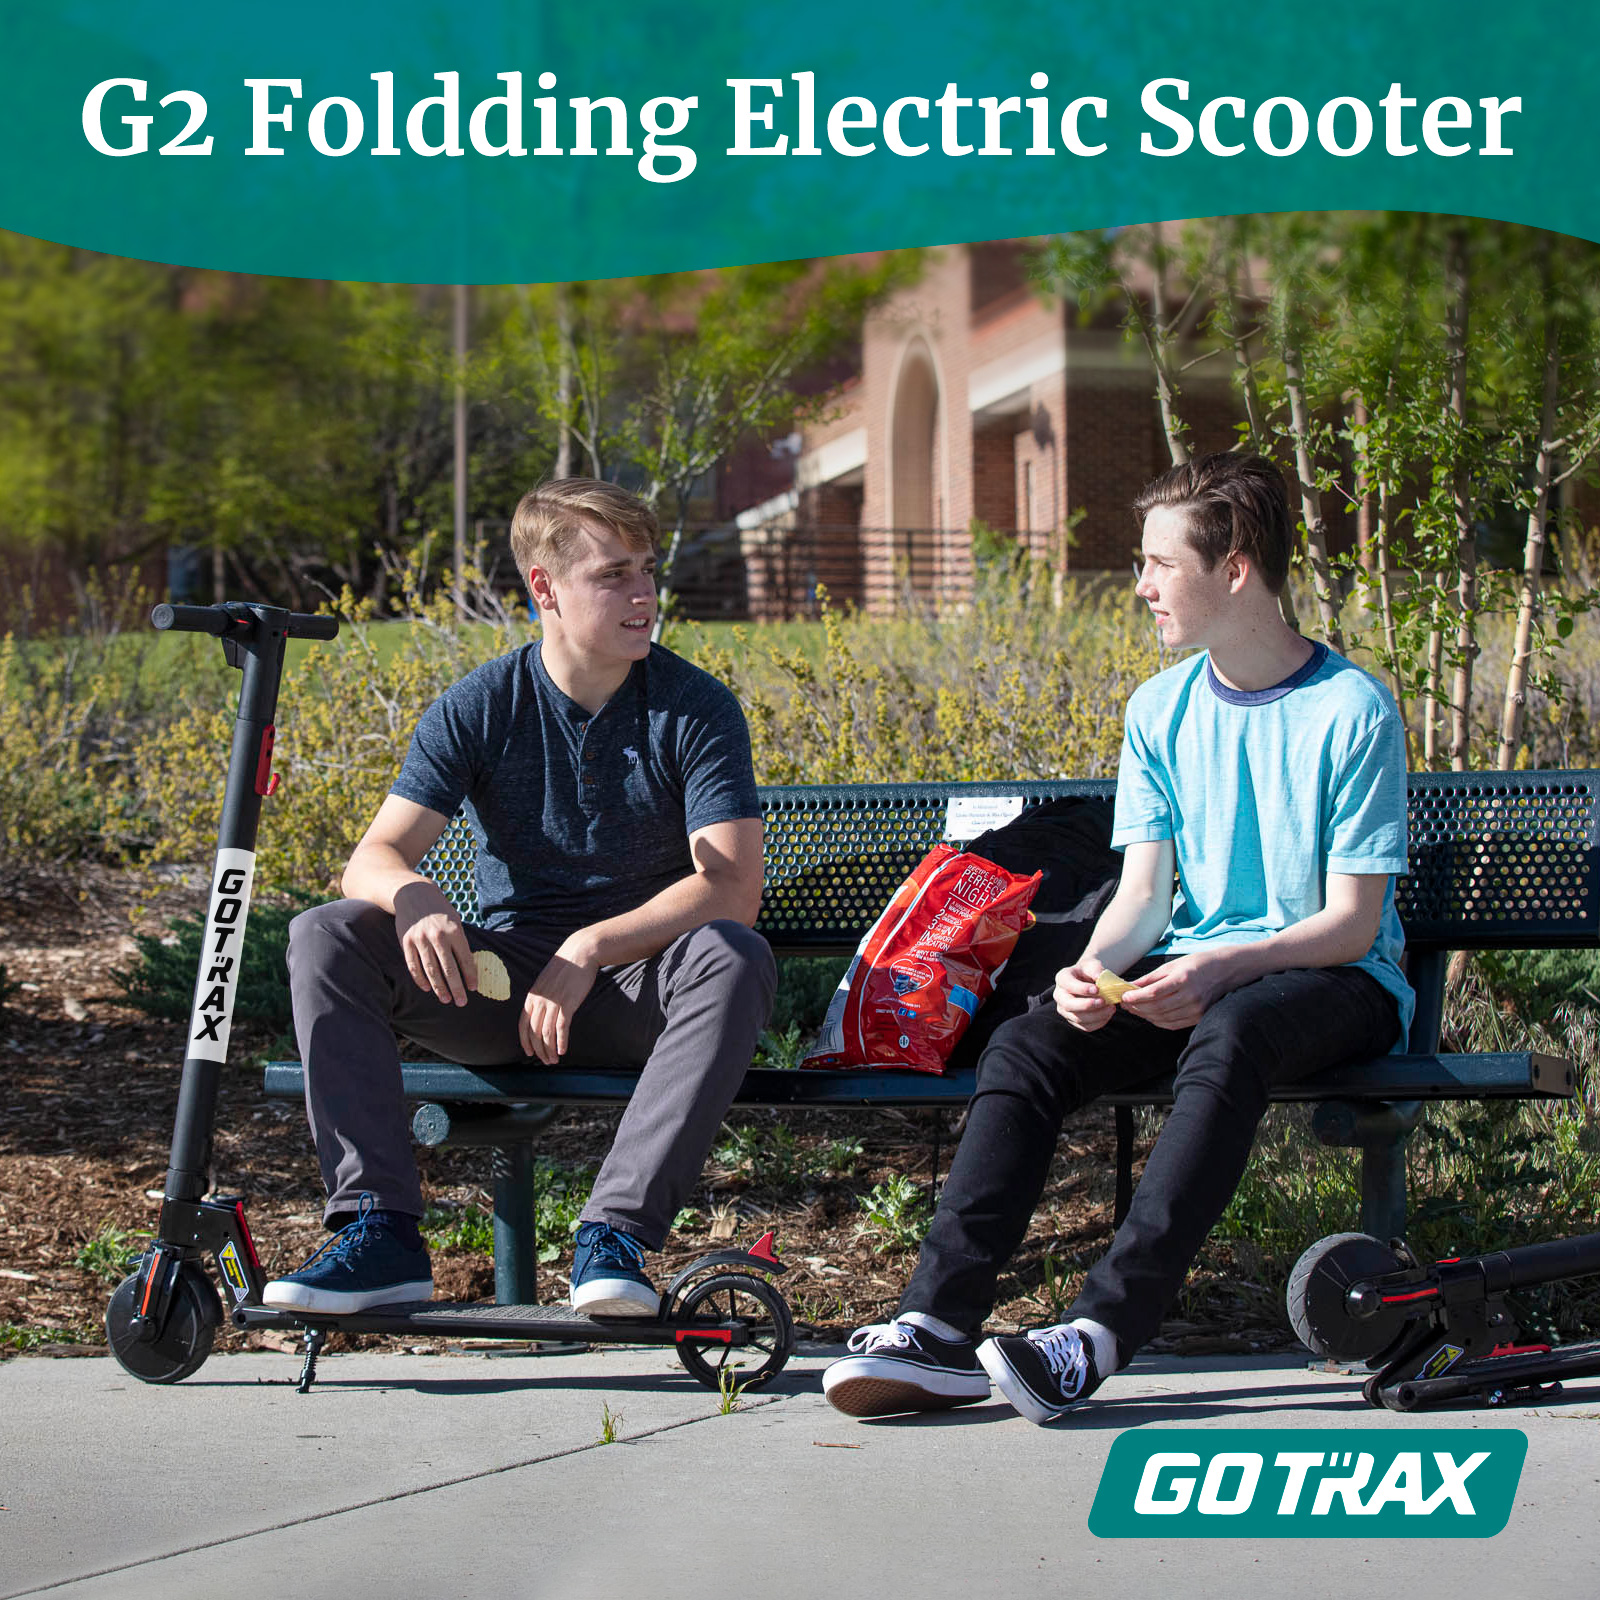 GOTRAX G2 Foldable Electric Scooter for Teens Age of 8+ with 6.5" Solid Tires 200W up 15.5mph, Black - image 3 of 8